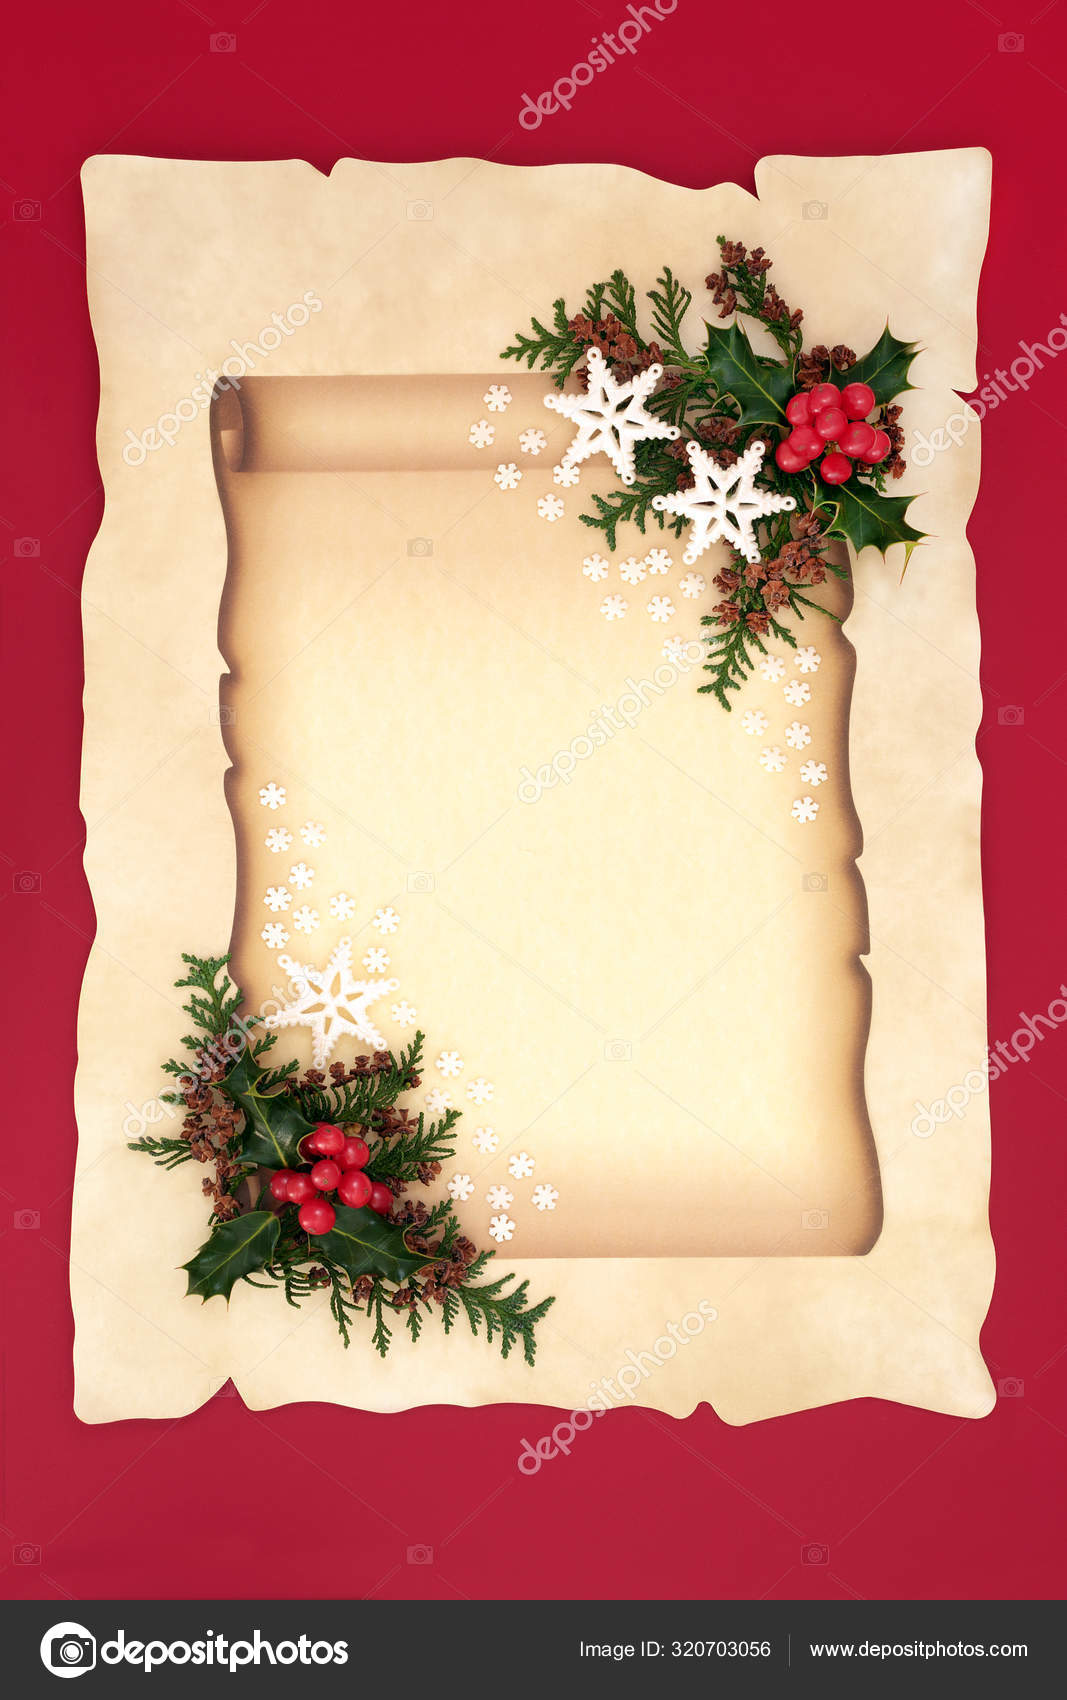 Christmas Scroll on Parchment Paper with Holly & Cedar Stock Photo